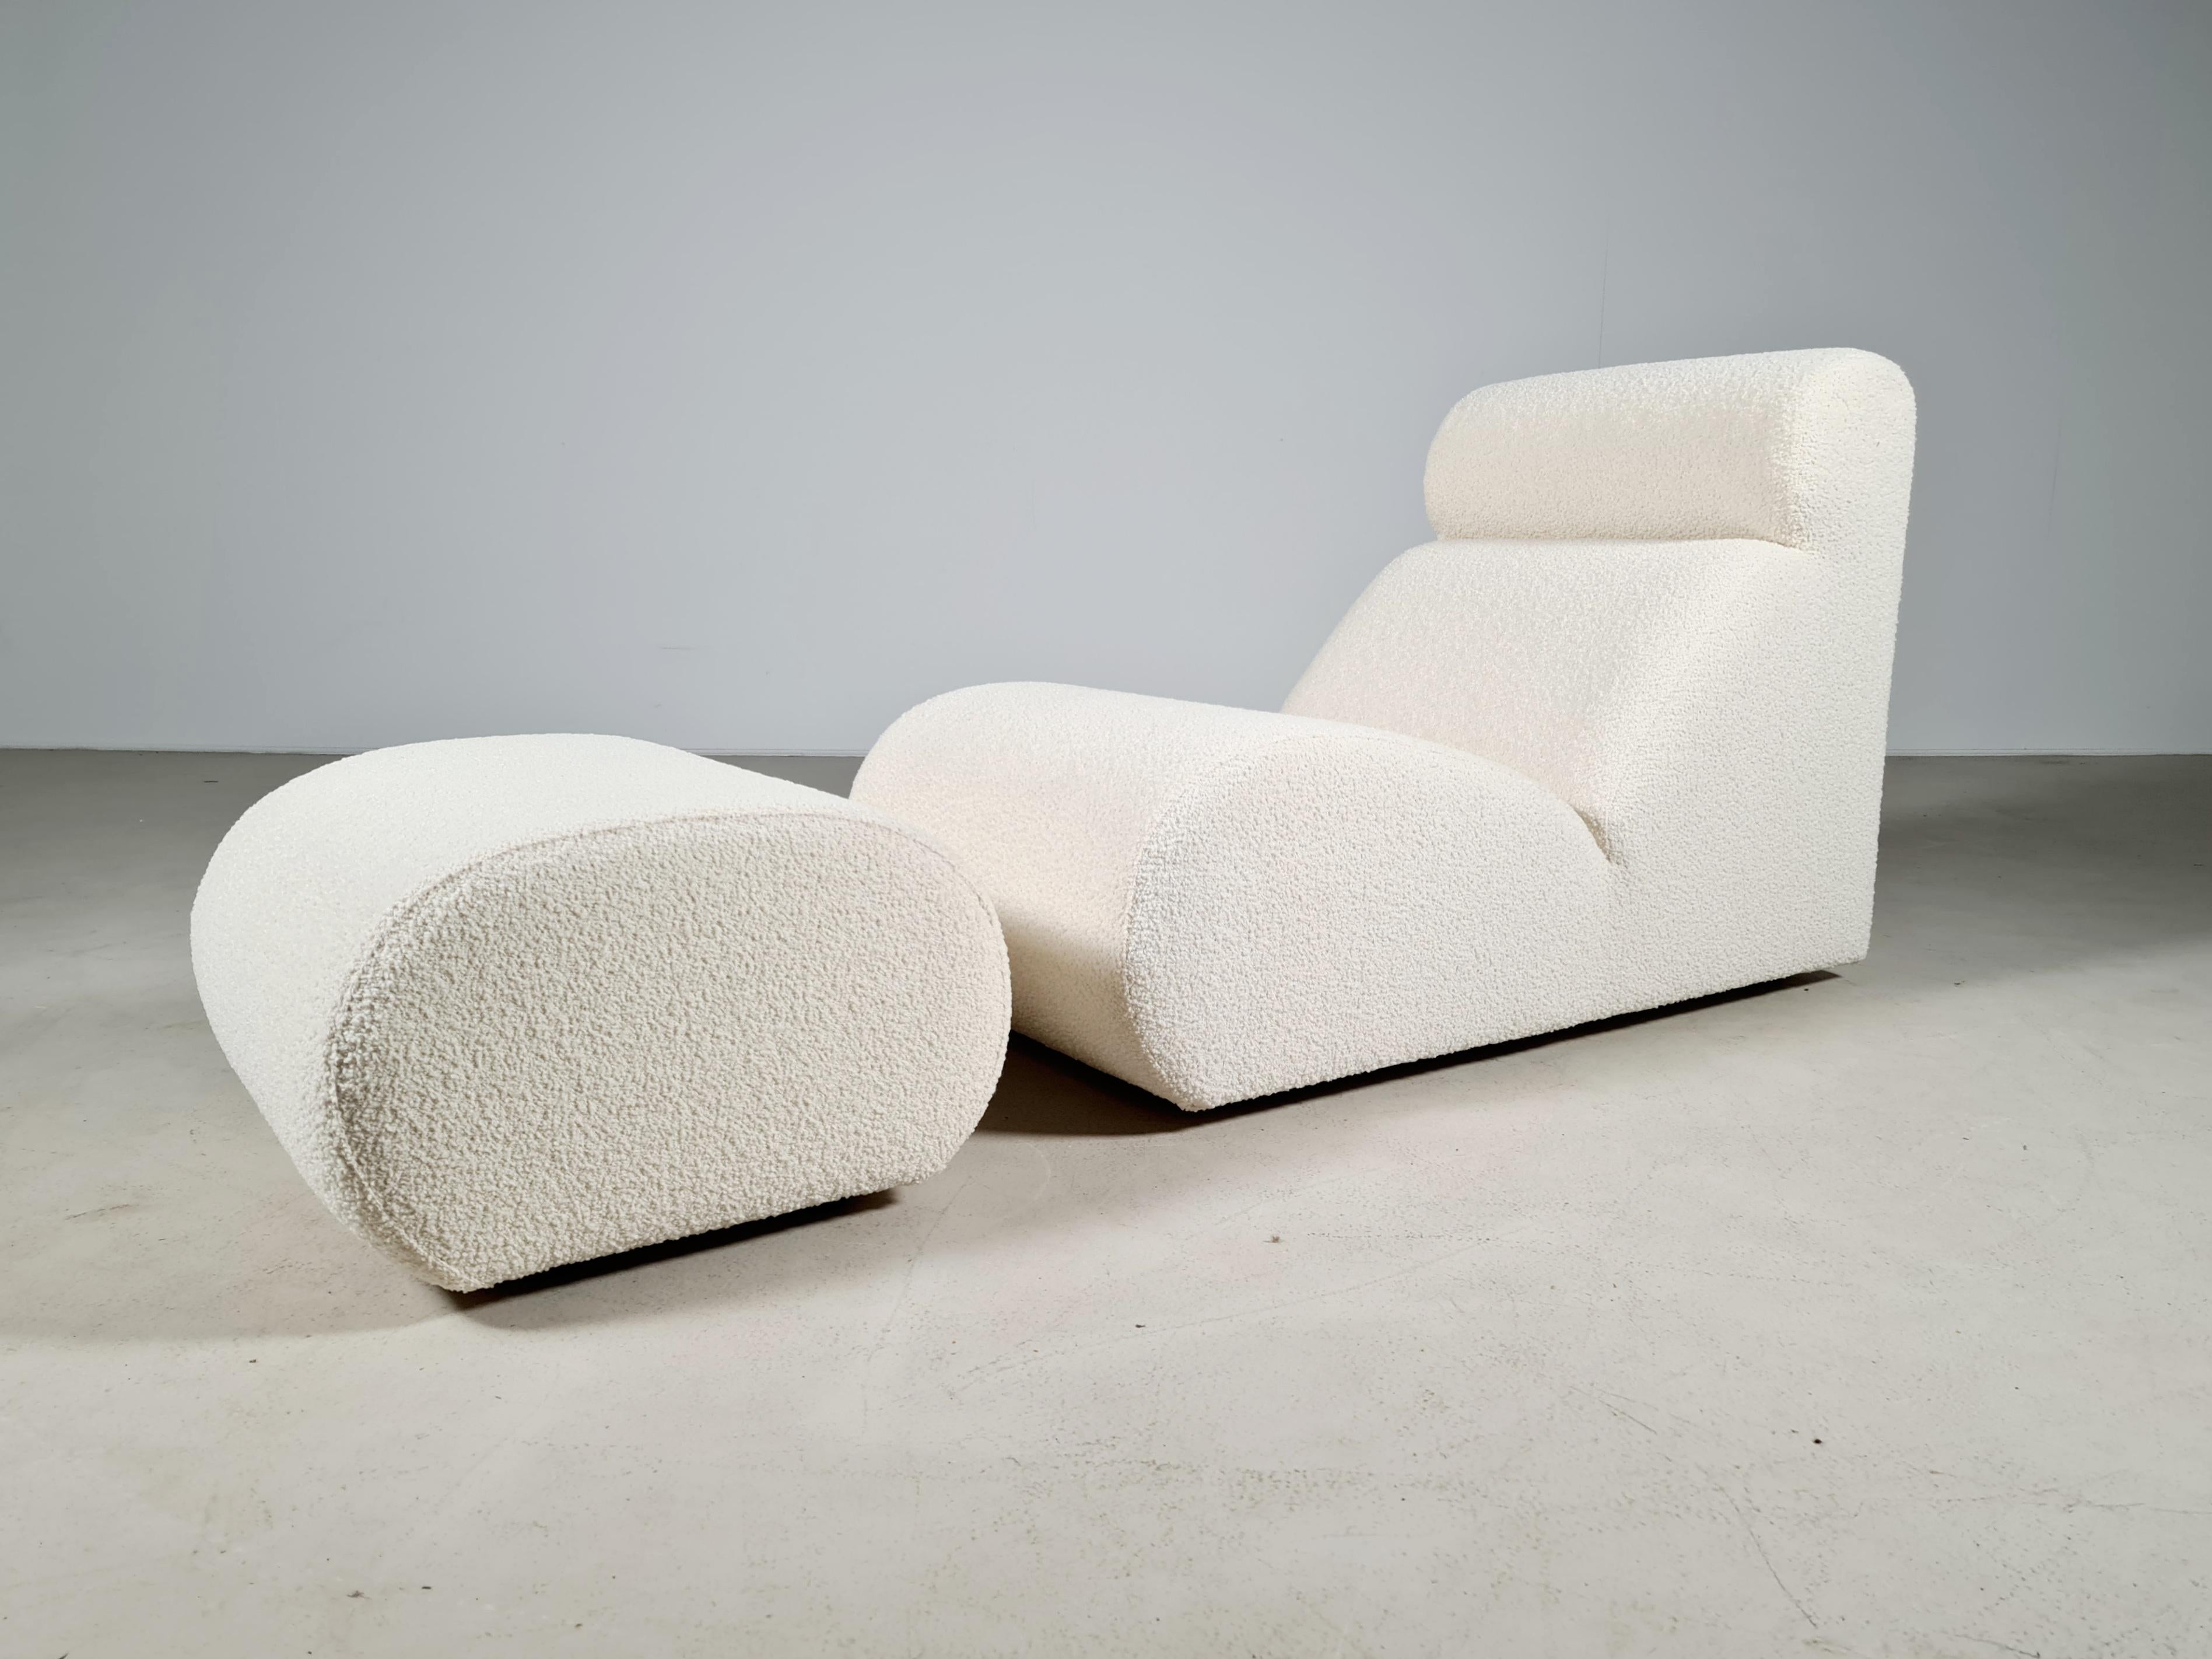 Rare Bobo easy chair designed by Cini Boeri for Arflex in the 1960s. Reupholstered in a creme bouclé by Bisson Bruneel. 

This original example represents one of the first attempts to create a seat from a single piece of foam with no armature. It